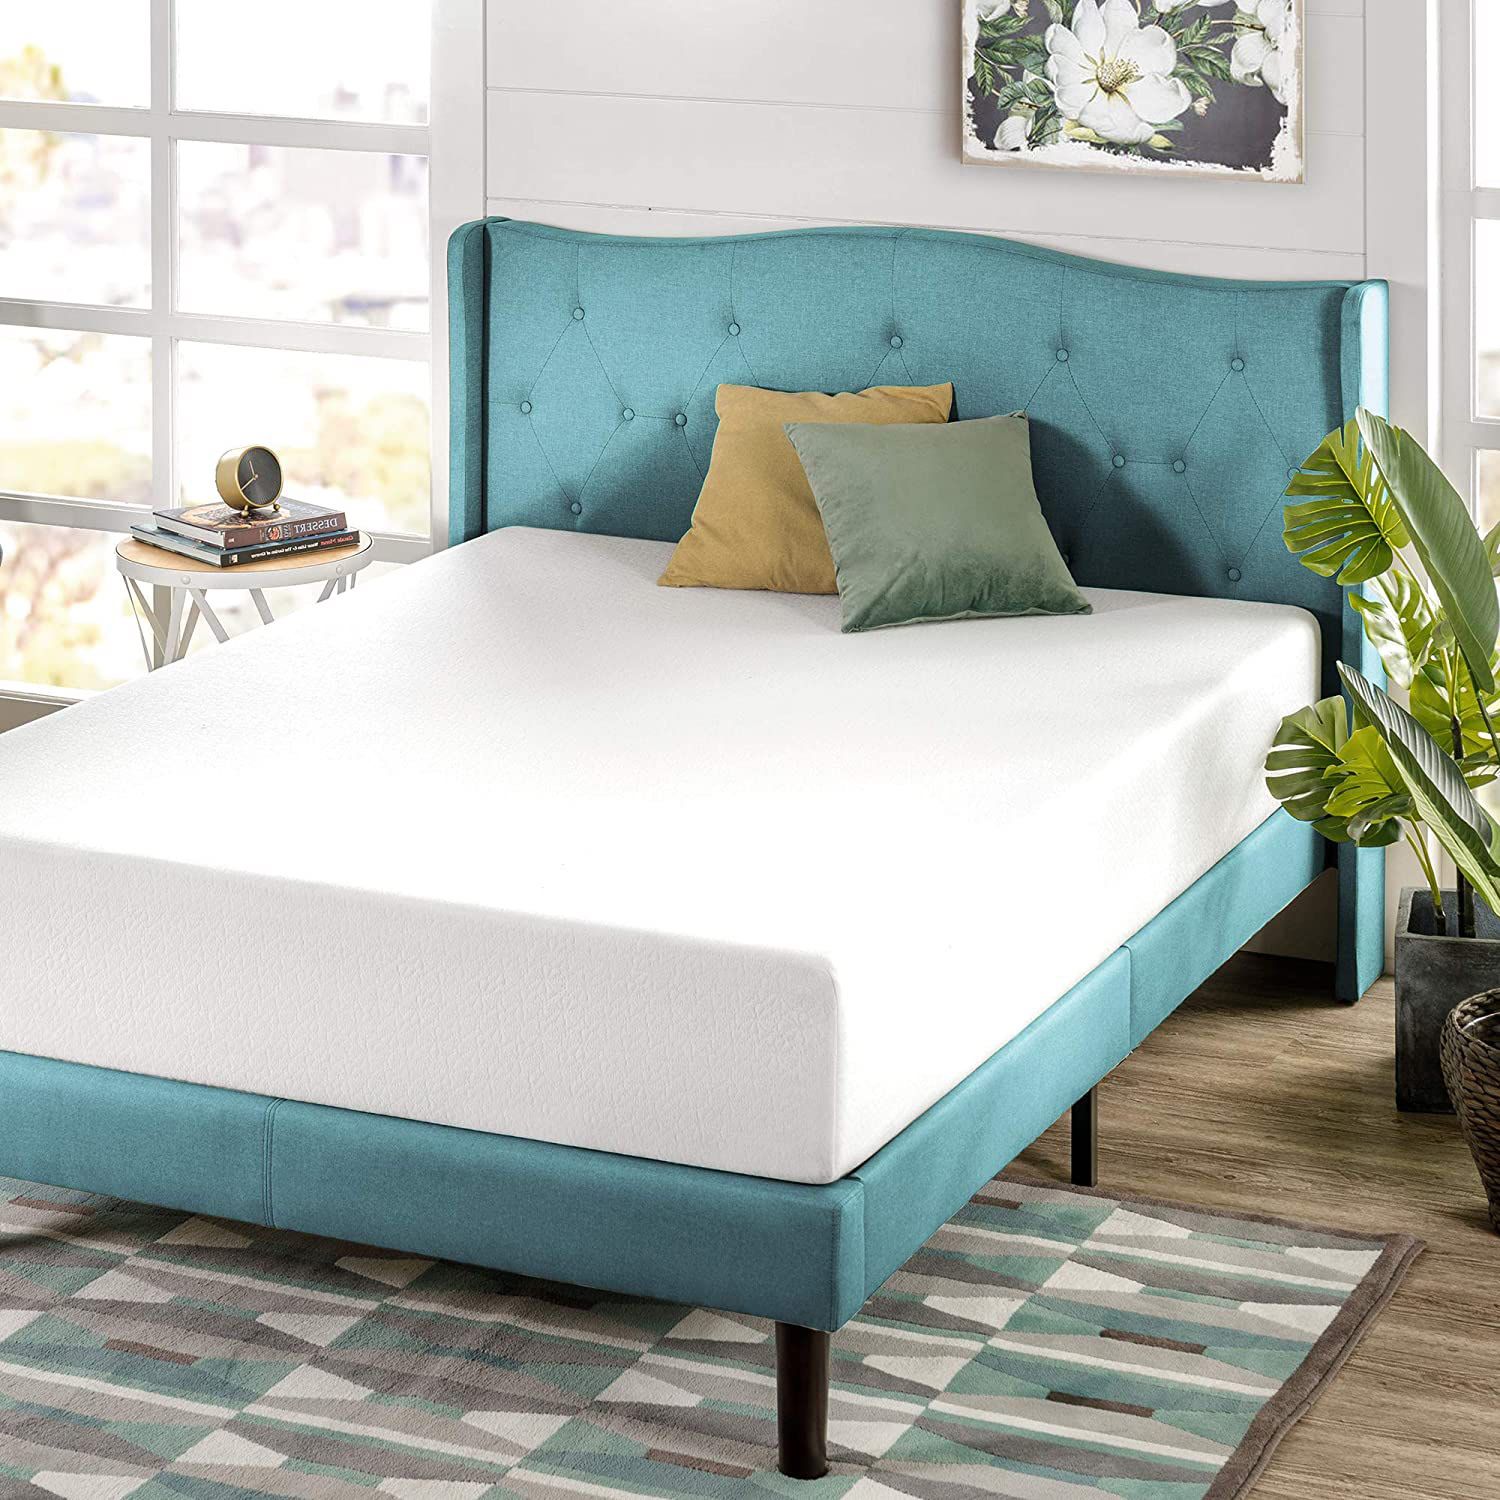 14 Best Mattresses On 2022 The, Which Are The Best Mattresses For Adjustable Beds